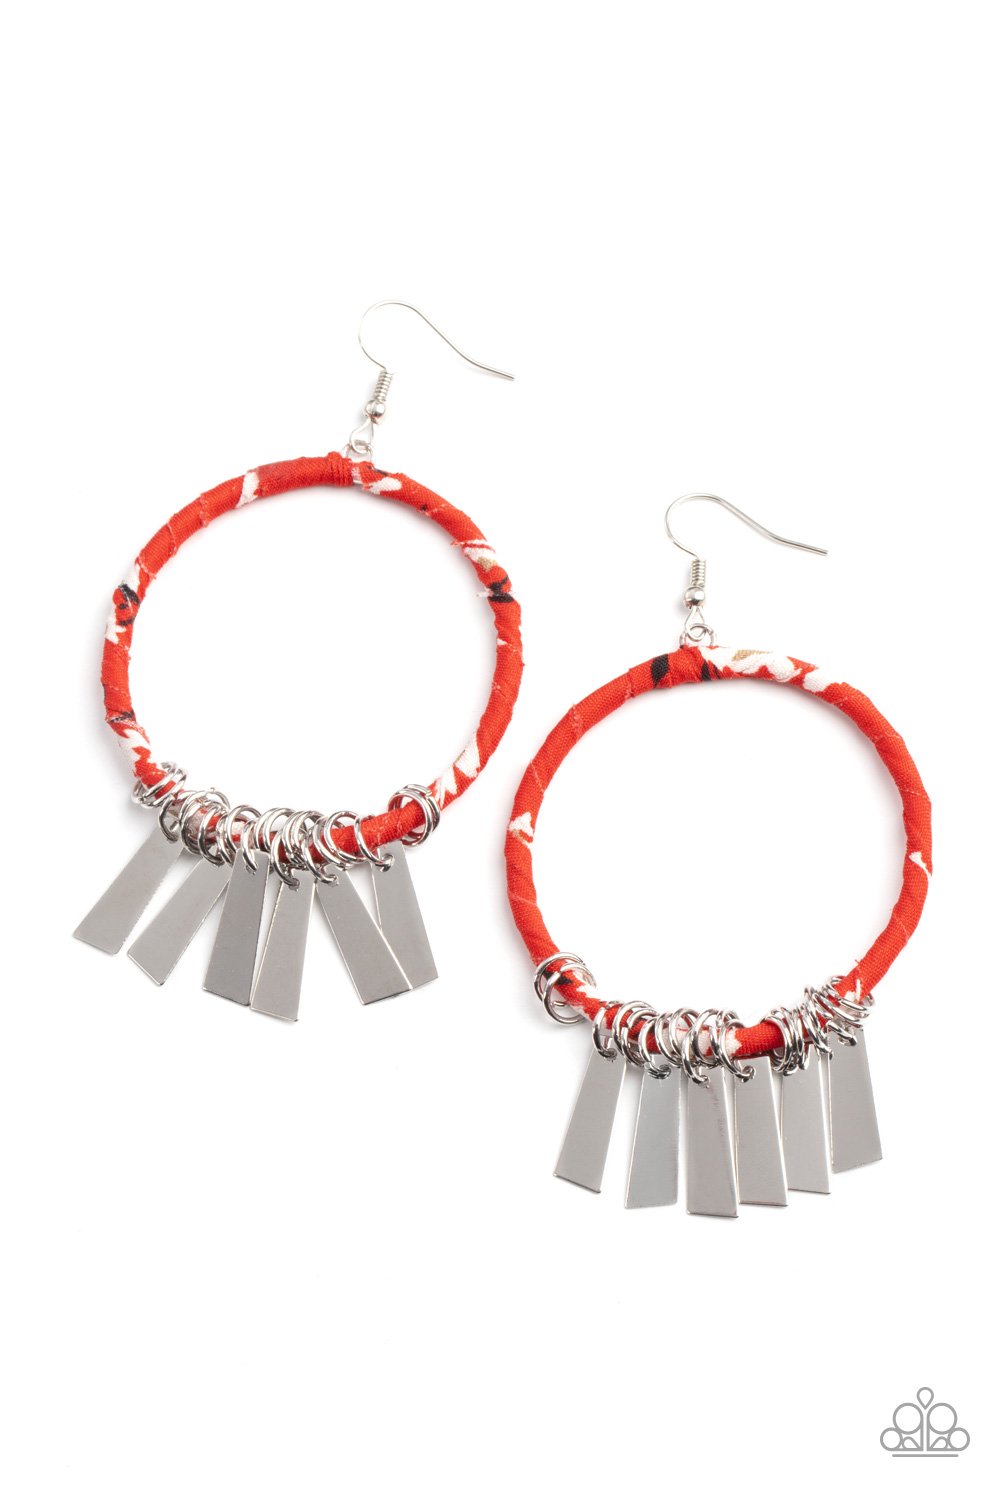 &lt;p&gt;Flared rectangular silver plates swing from the bottom of a hoop wrapped in red, black, and white floral fabric, creating a whimsical fringe. Earring attaches to a standard fishhook fitting. &lt;/p&gt;  

&lt;p&gt;&lt;br&gt;&lt;/p&gt;